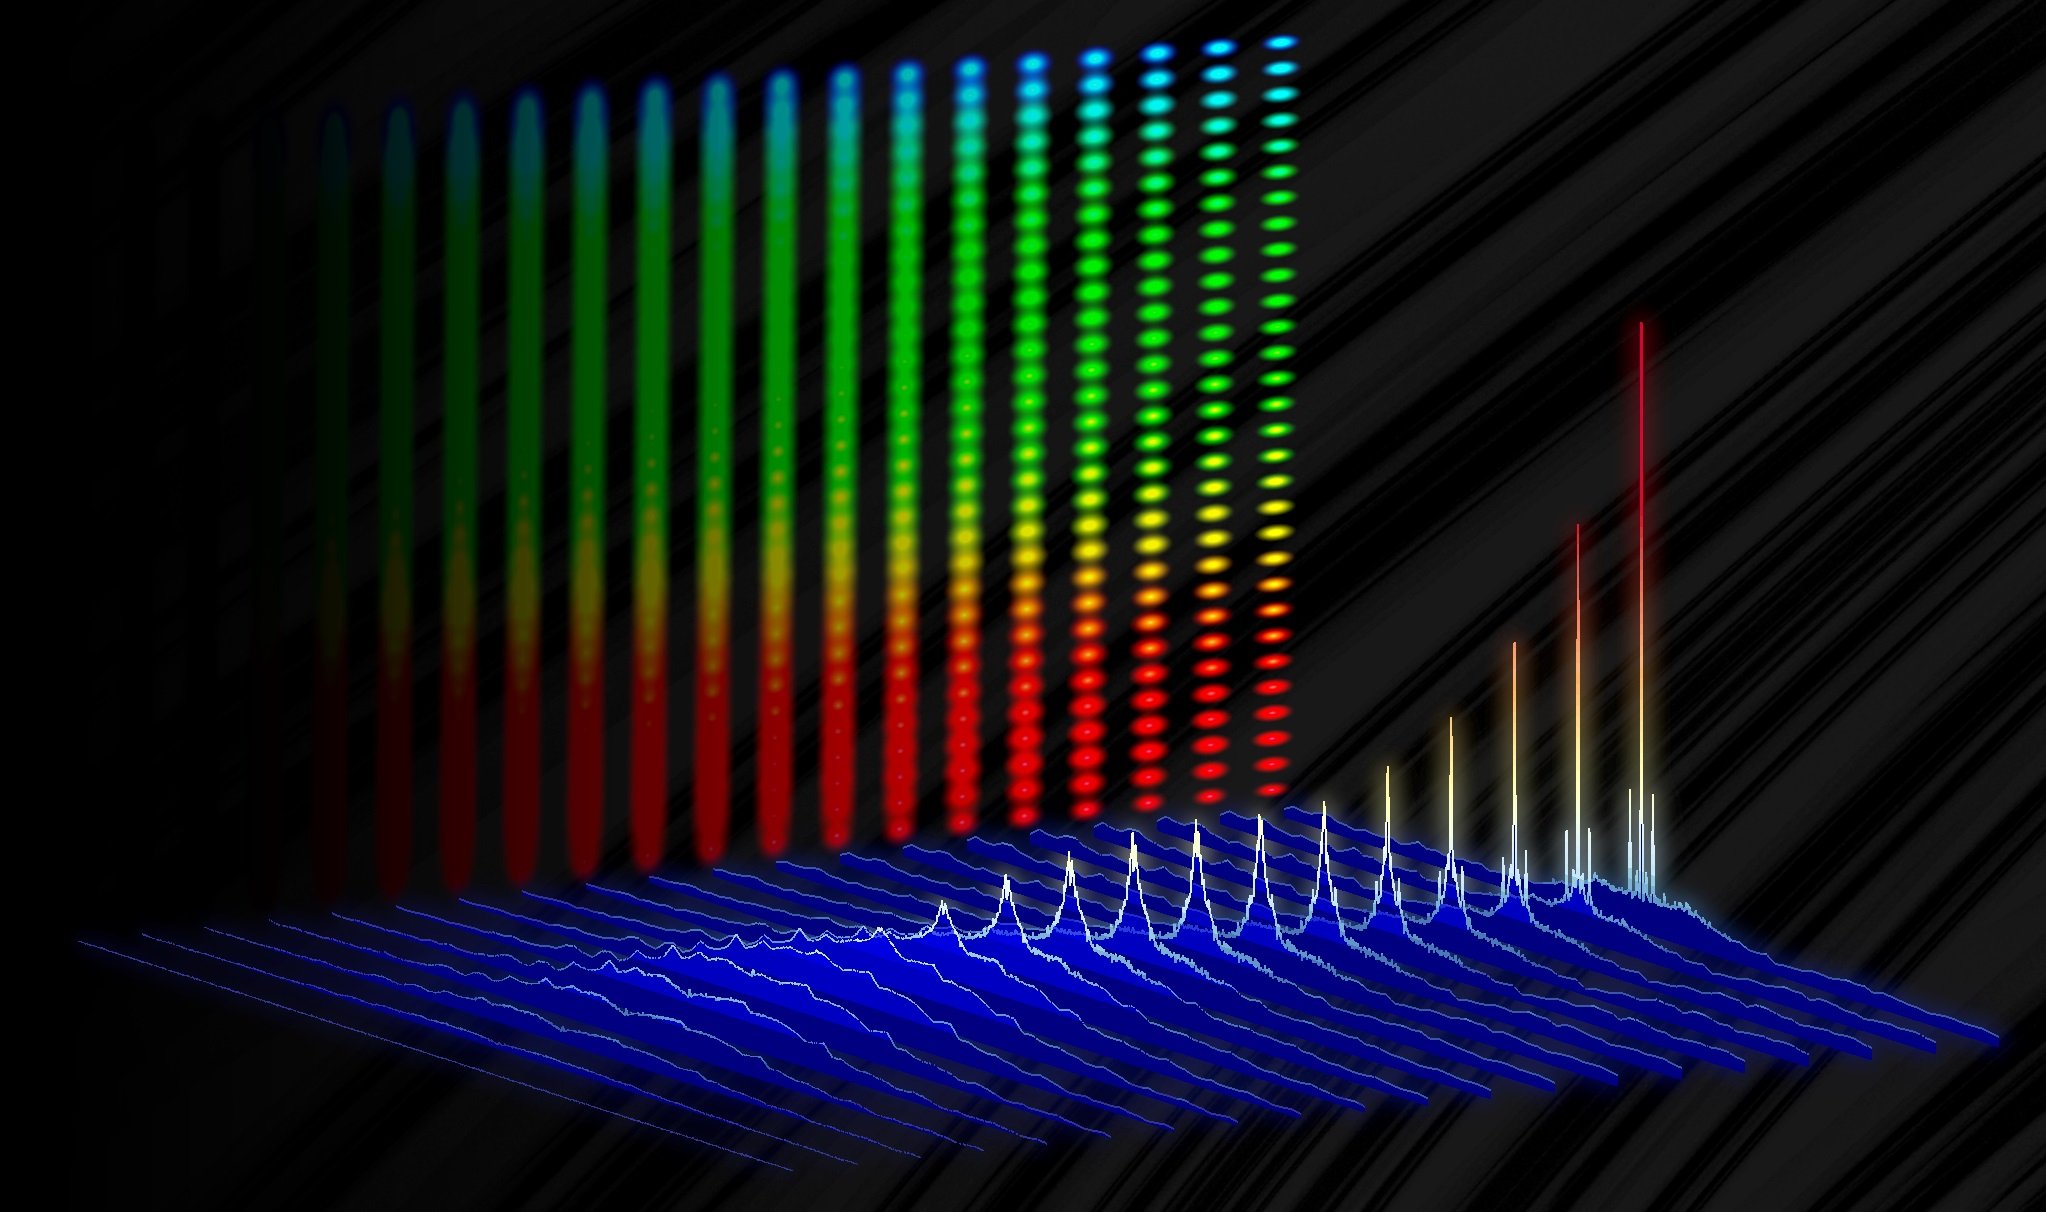 Illustration depicting how specific frequencies, or colors, of light (sharp peaks) emerge from the electronic background noise (blue) in NIST’s ultrafast electro-optic laser. The vertical backdrop shows how these colors combine to create an optical frequency comb, or “ruler” for light. Credit: D. Carlson/NIST